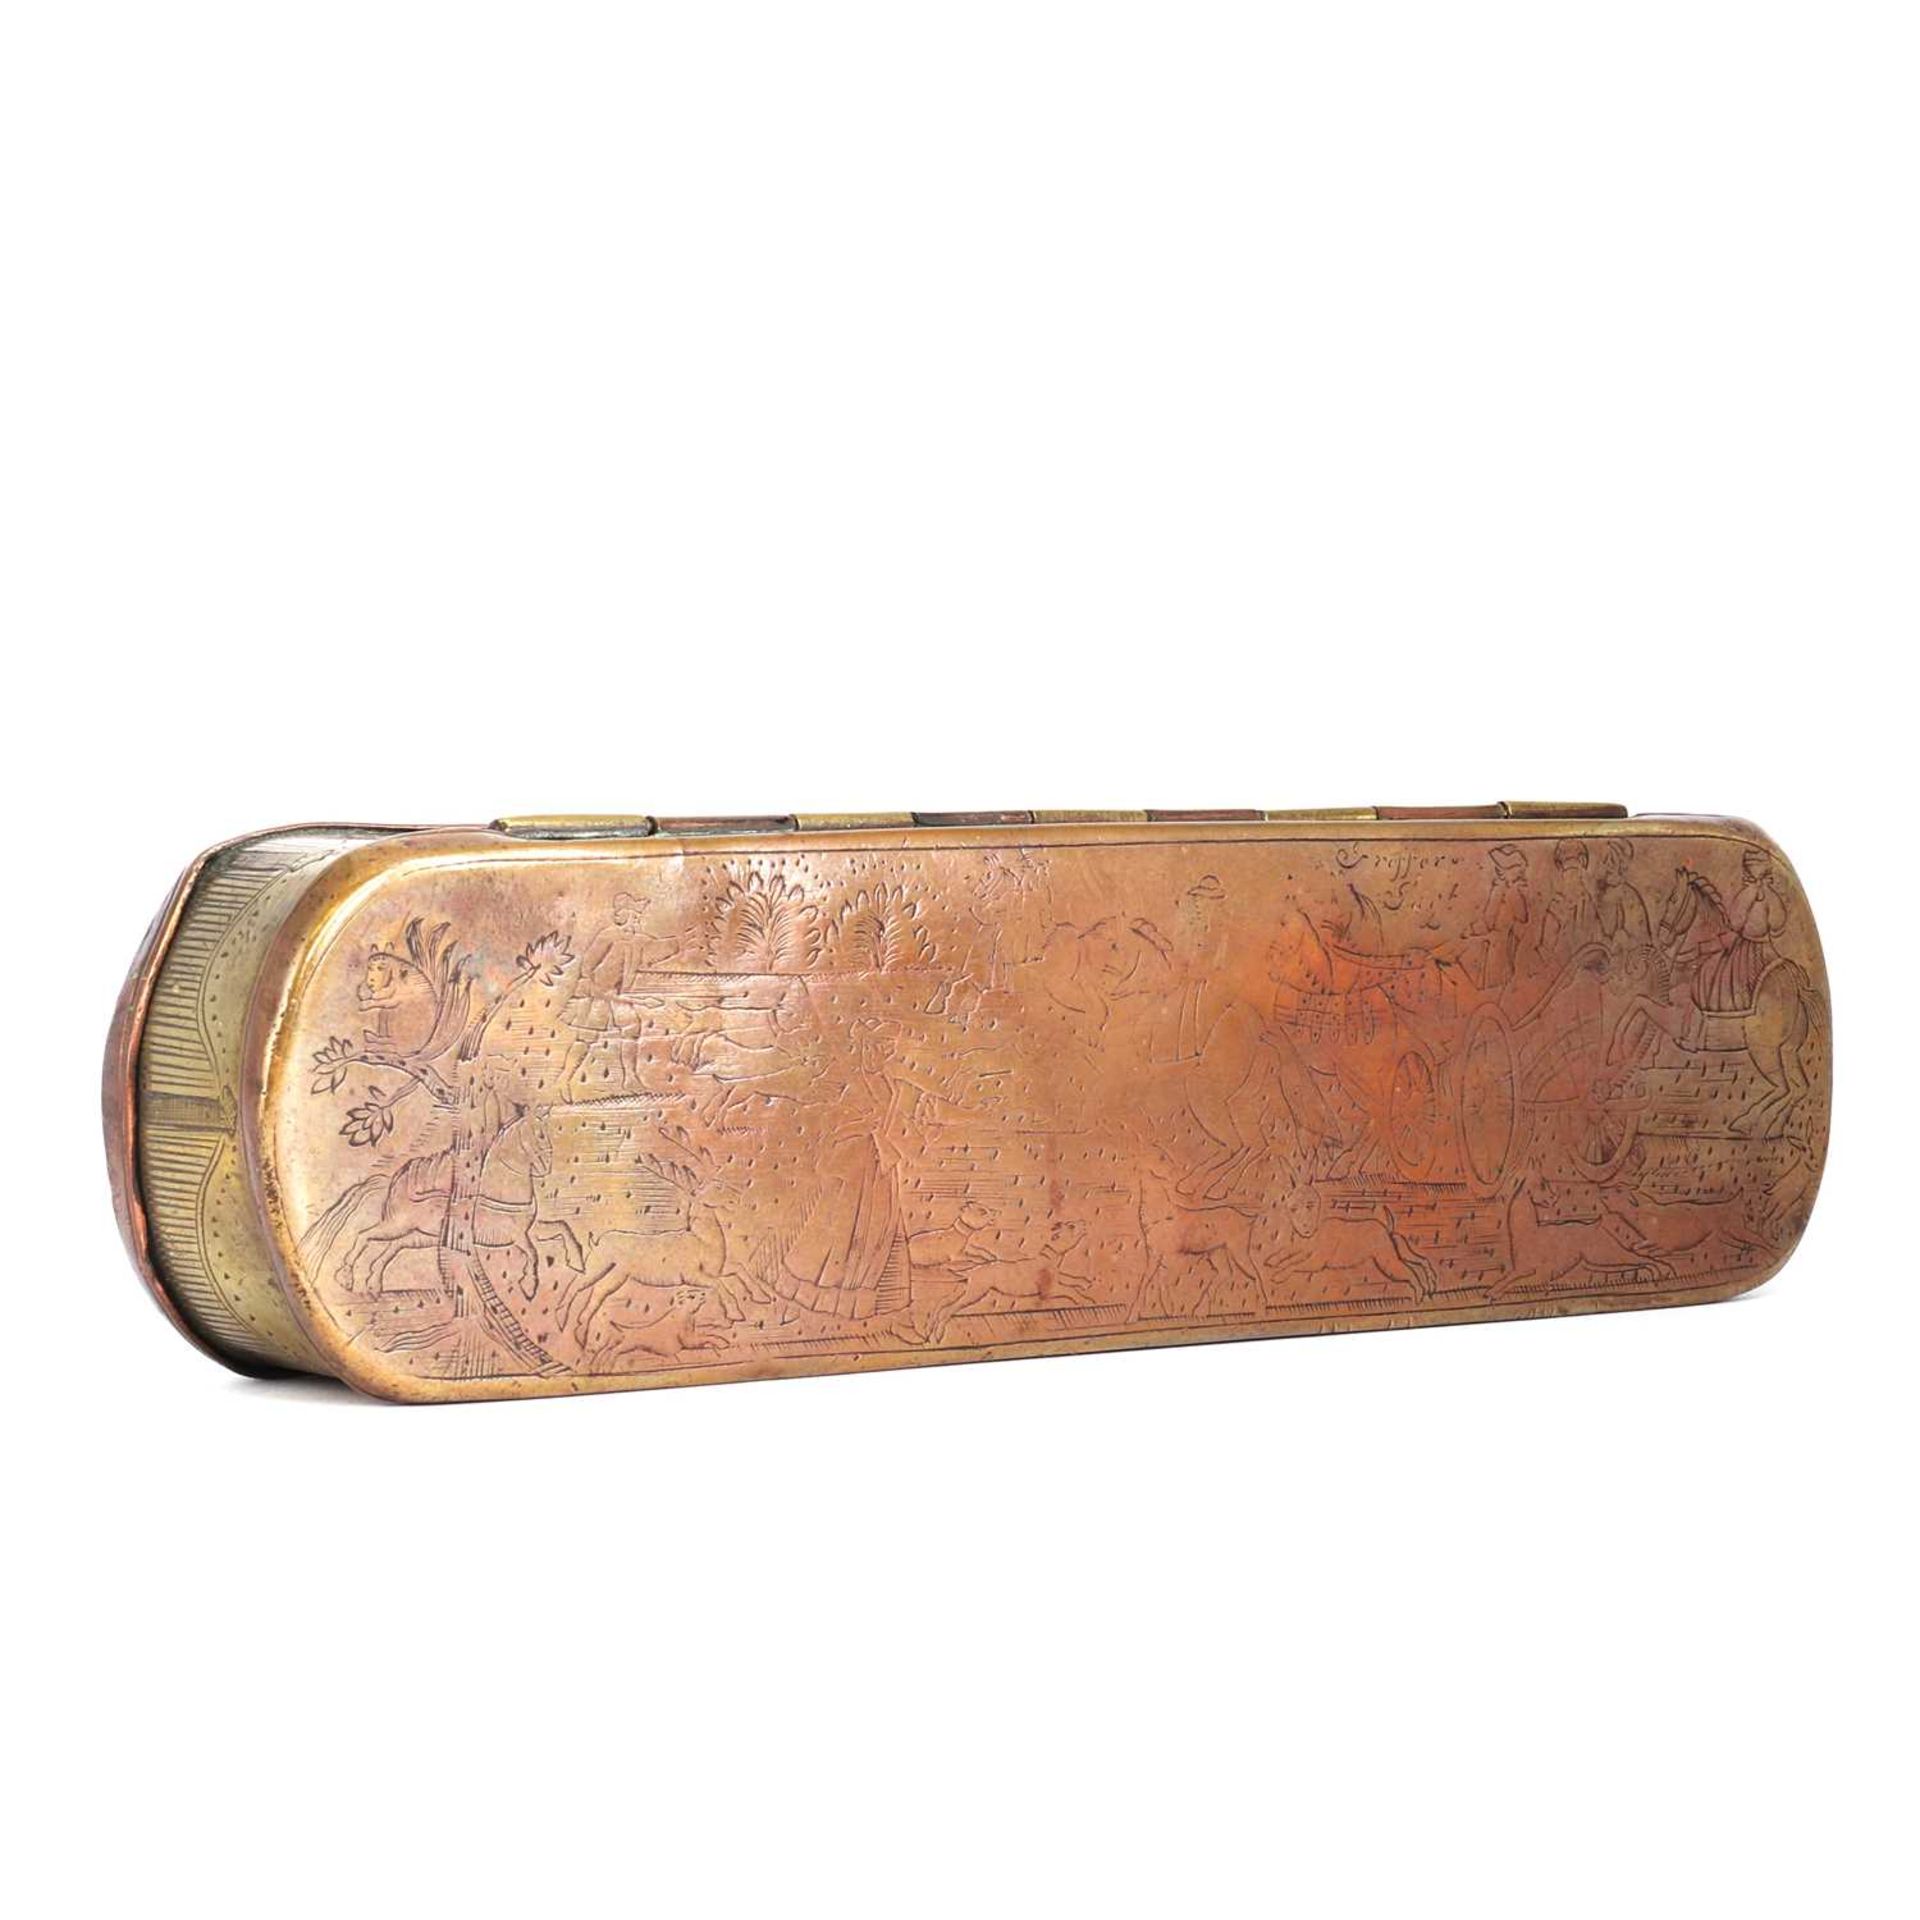 An unusual copper and brass tobacco box, - Image 9 of 9